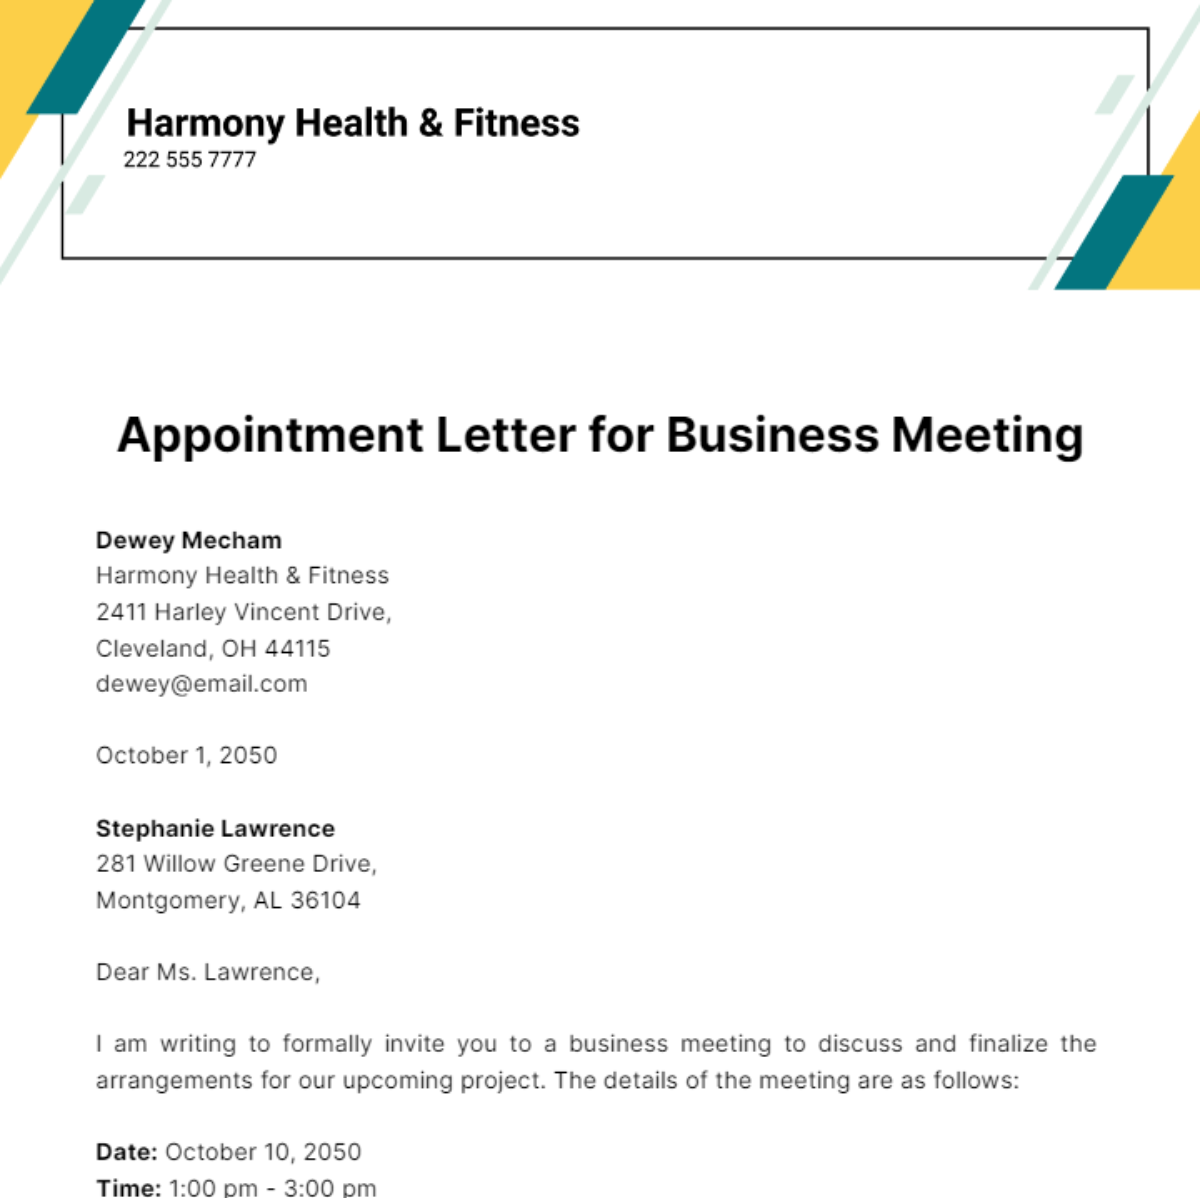 Appointment Letter for Business Meeting Template